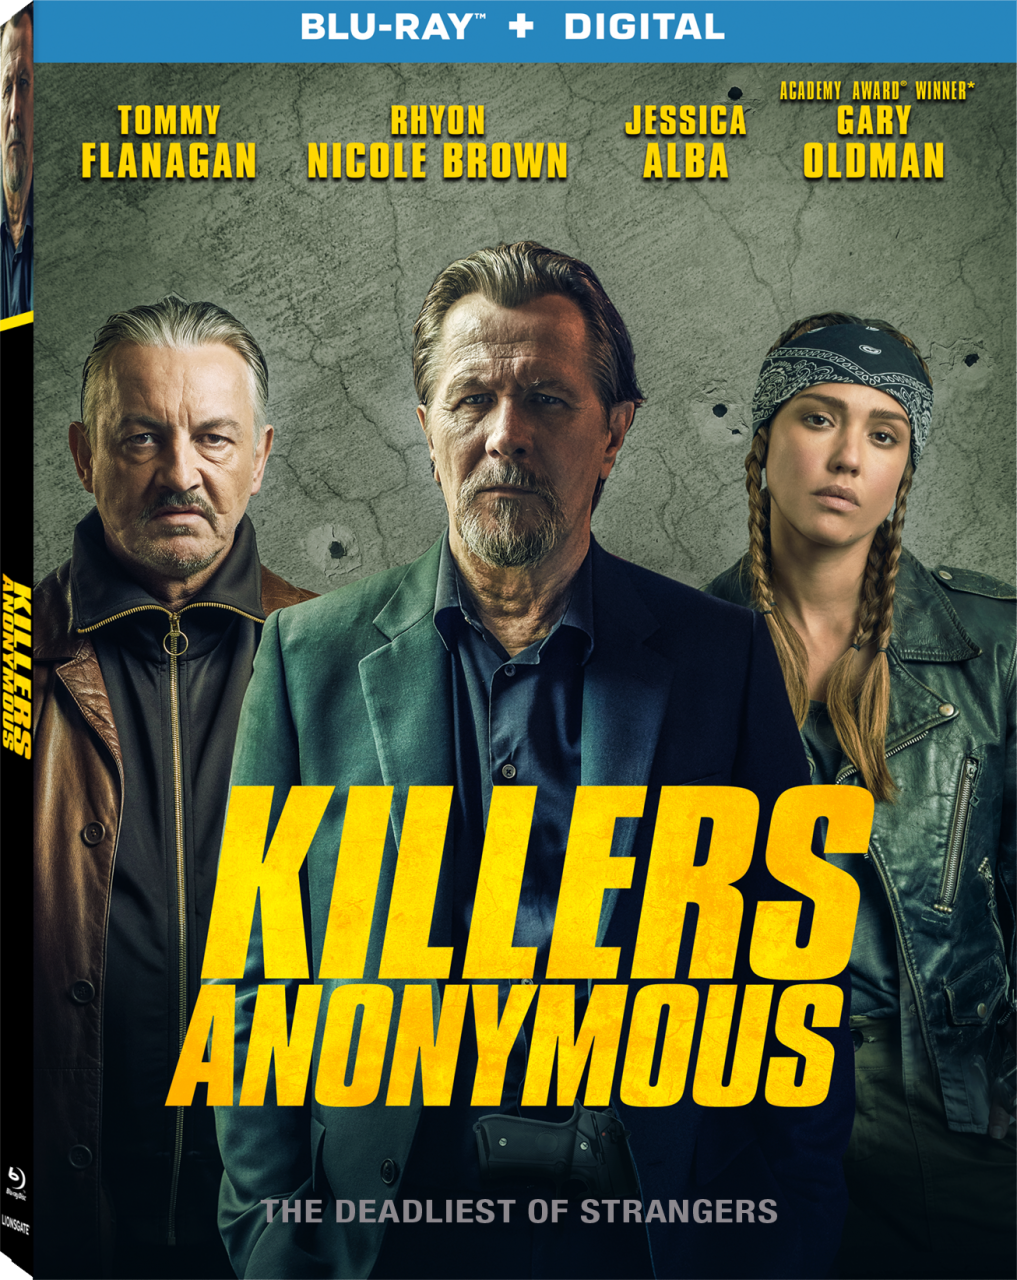 Killers Anonymous Blu-Ray Combo Pack cover (Lionsgate Home Entertainment)